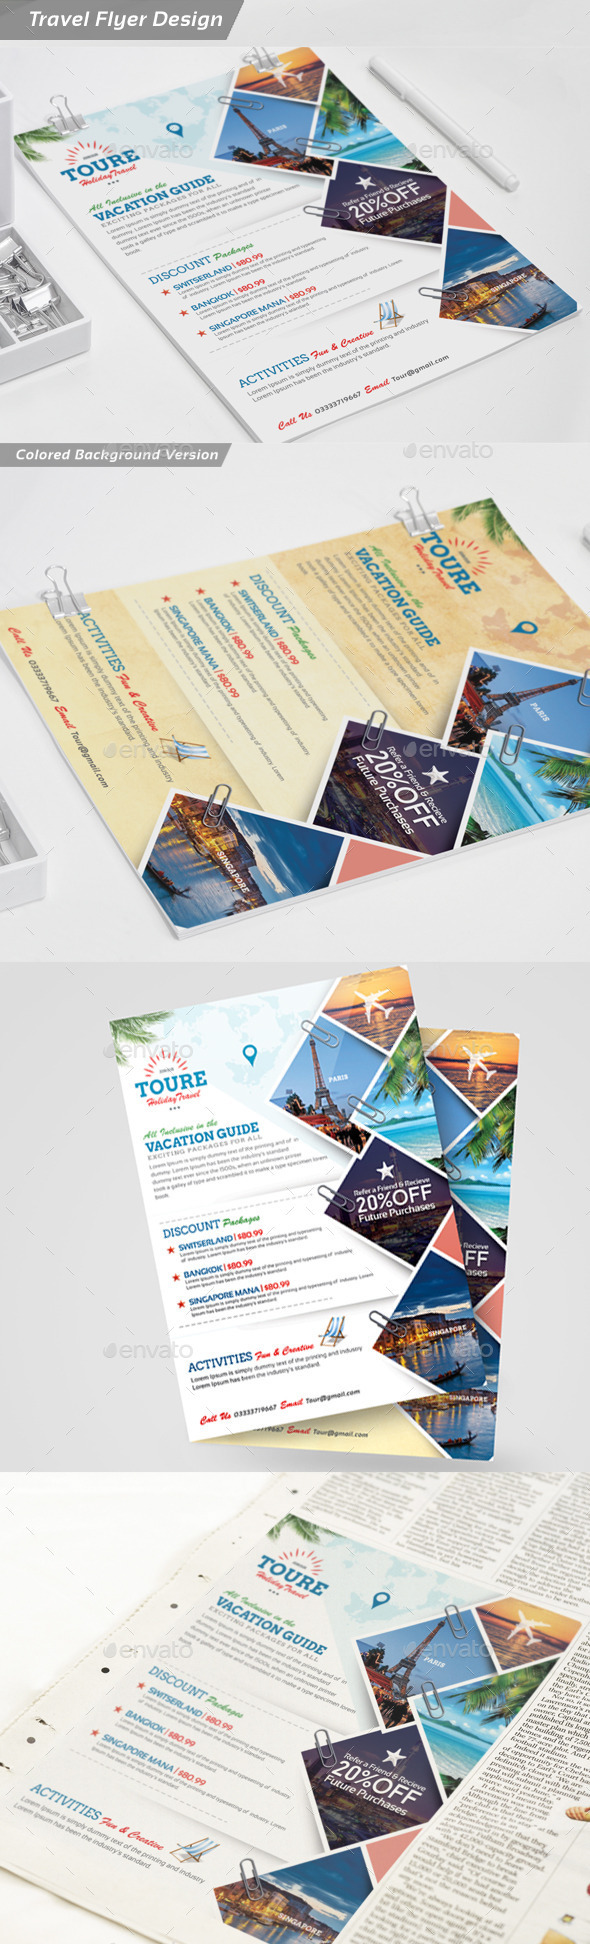 brochure Guide holidays hotel presentation packages pamphlet photos pictures poster Promotion template tour tourism flyer design